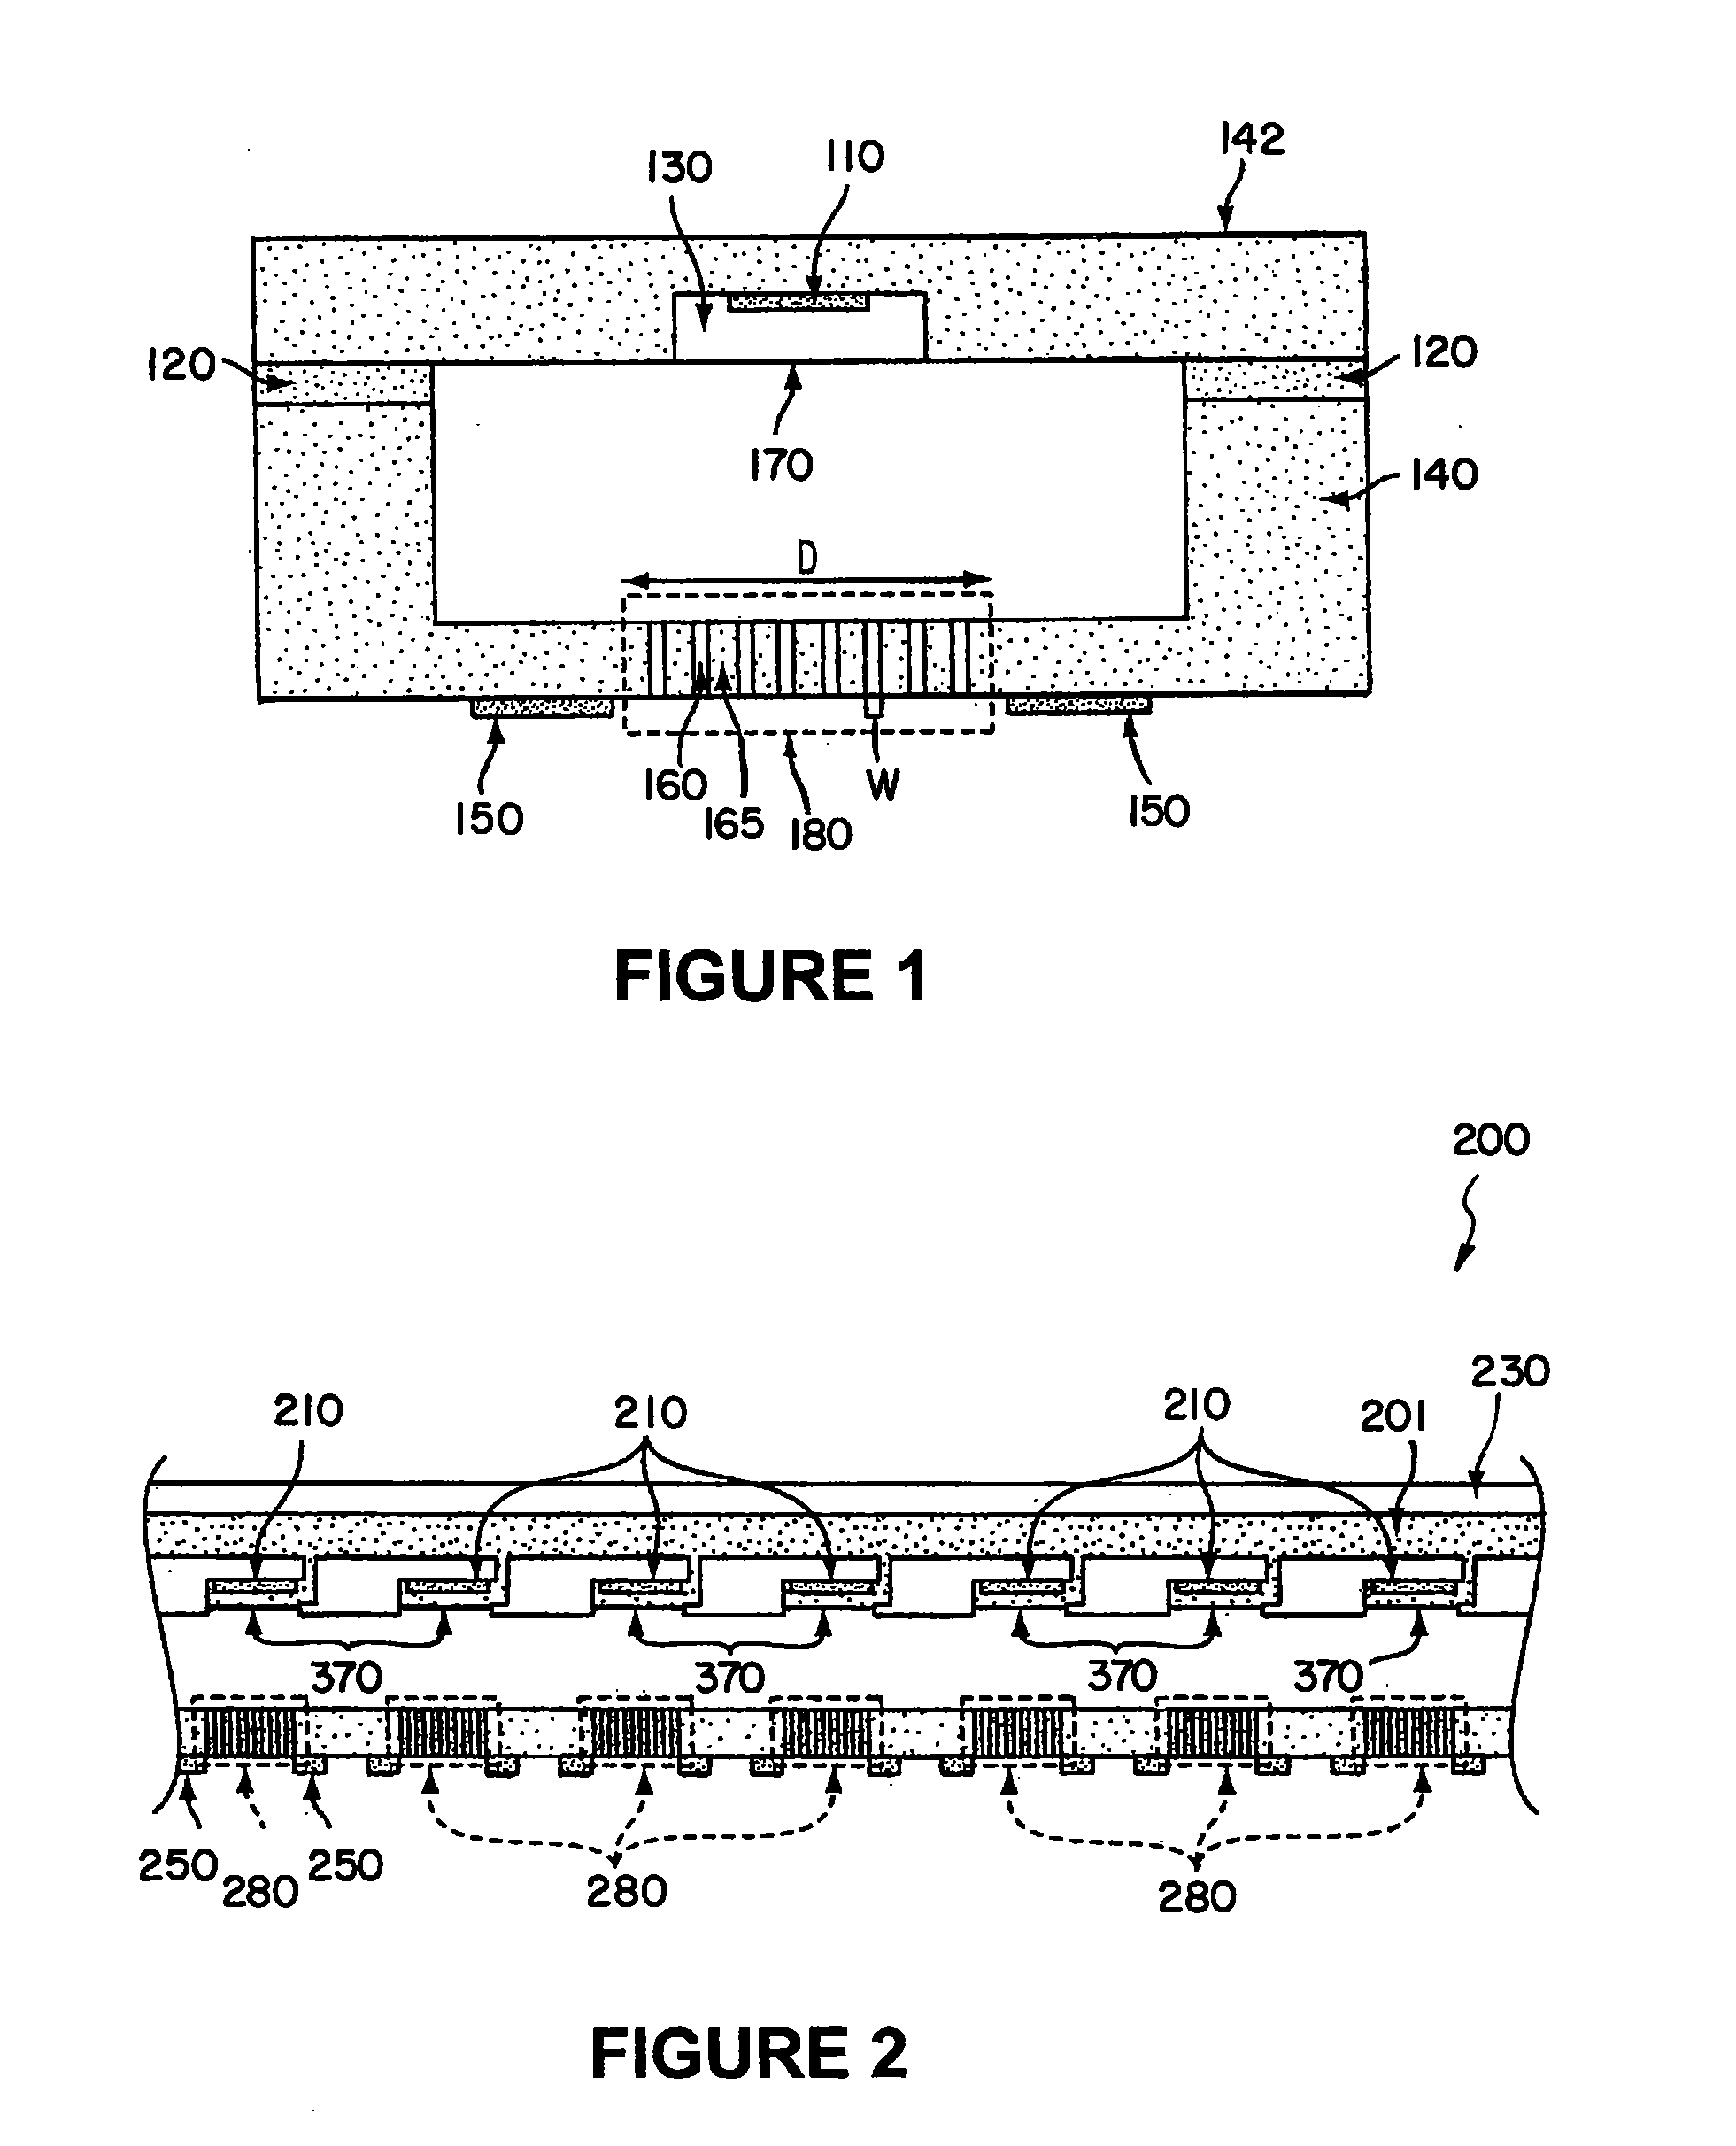 Method and apparatus for controlling the temperature of an electrically-heated discharge nozzle